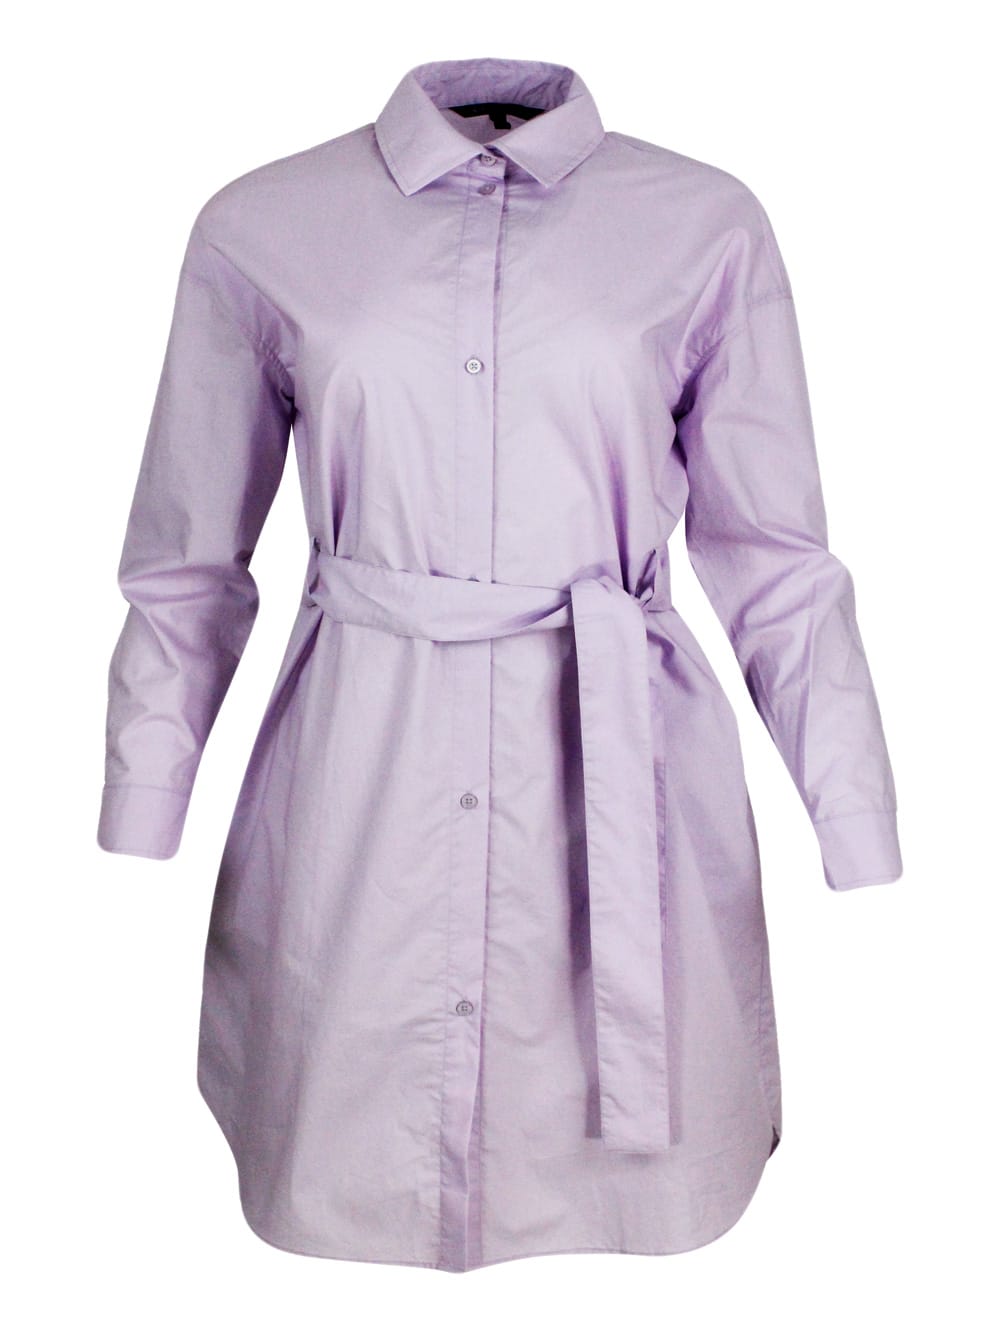 Armani Collezioni Dress Made Of Soft Cotton With Long Sleeves, With Button Closure On The Front And Belt. In Pink